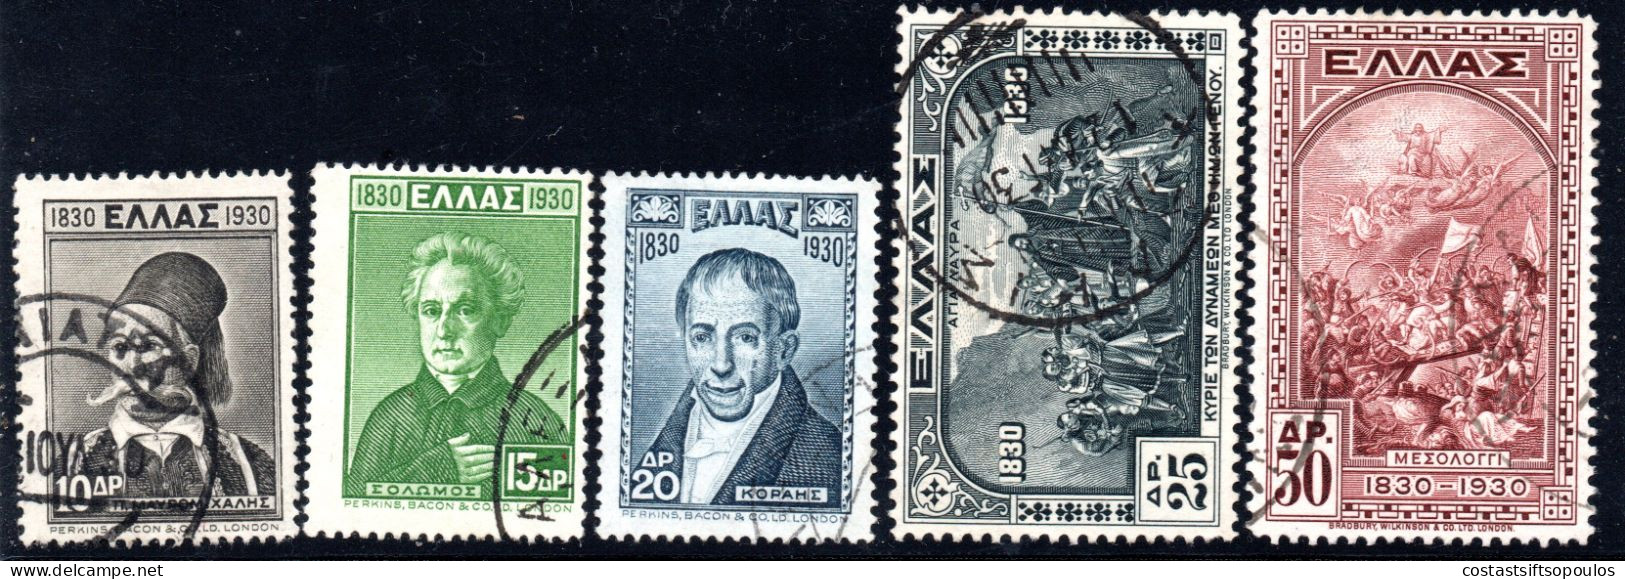 2954. GREECE.1930 INDEPENDENCE(HEROES) HIGH VALUES 10 DR-50 DR.HELLAS 504-508. - Gebraucht